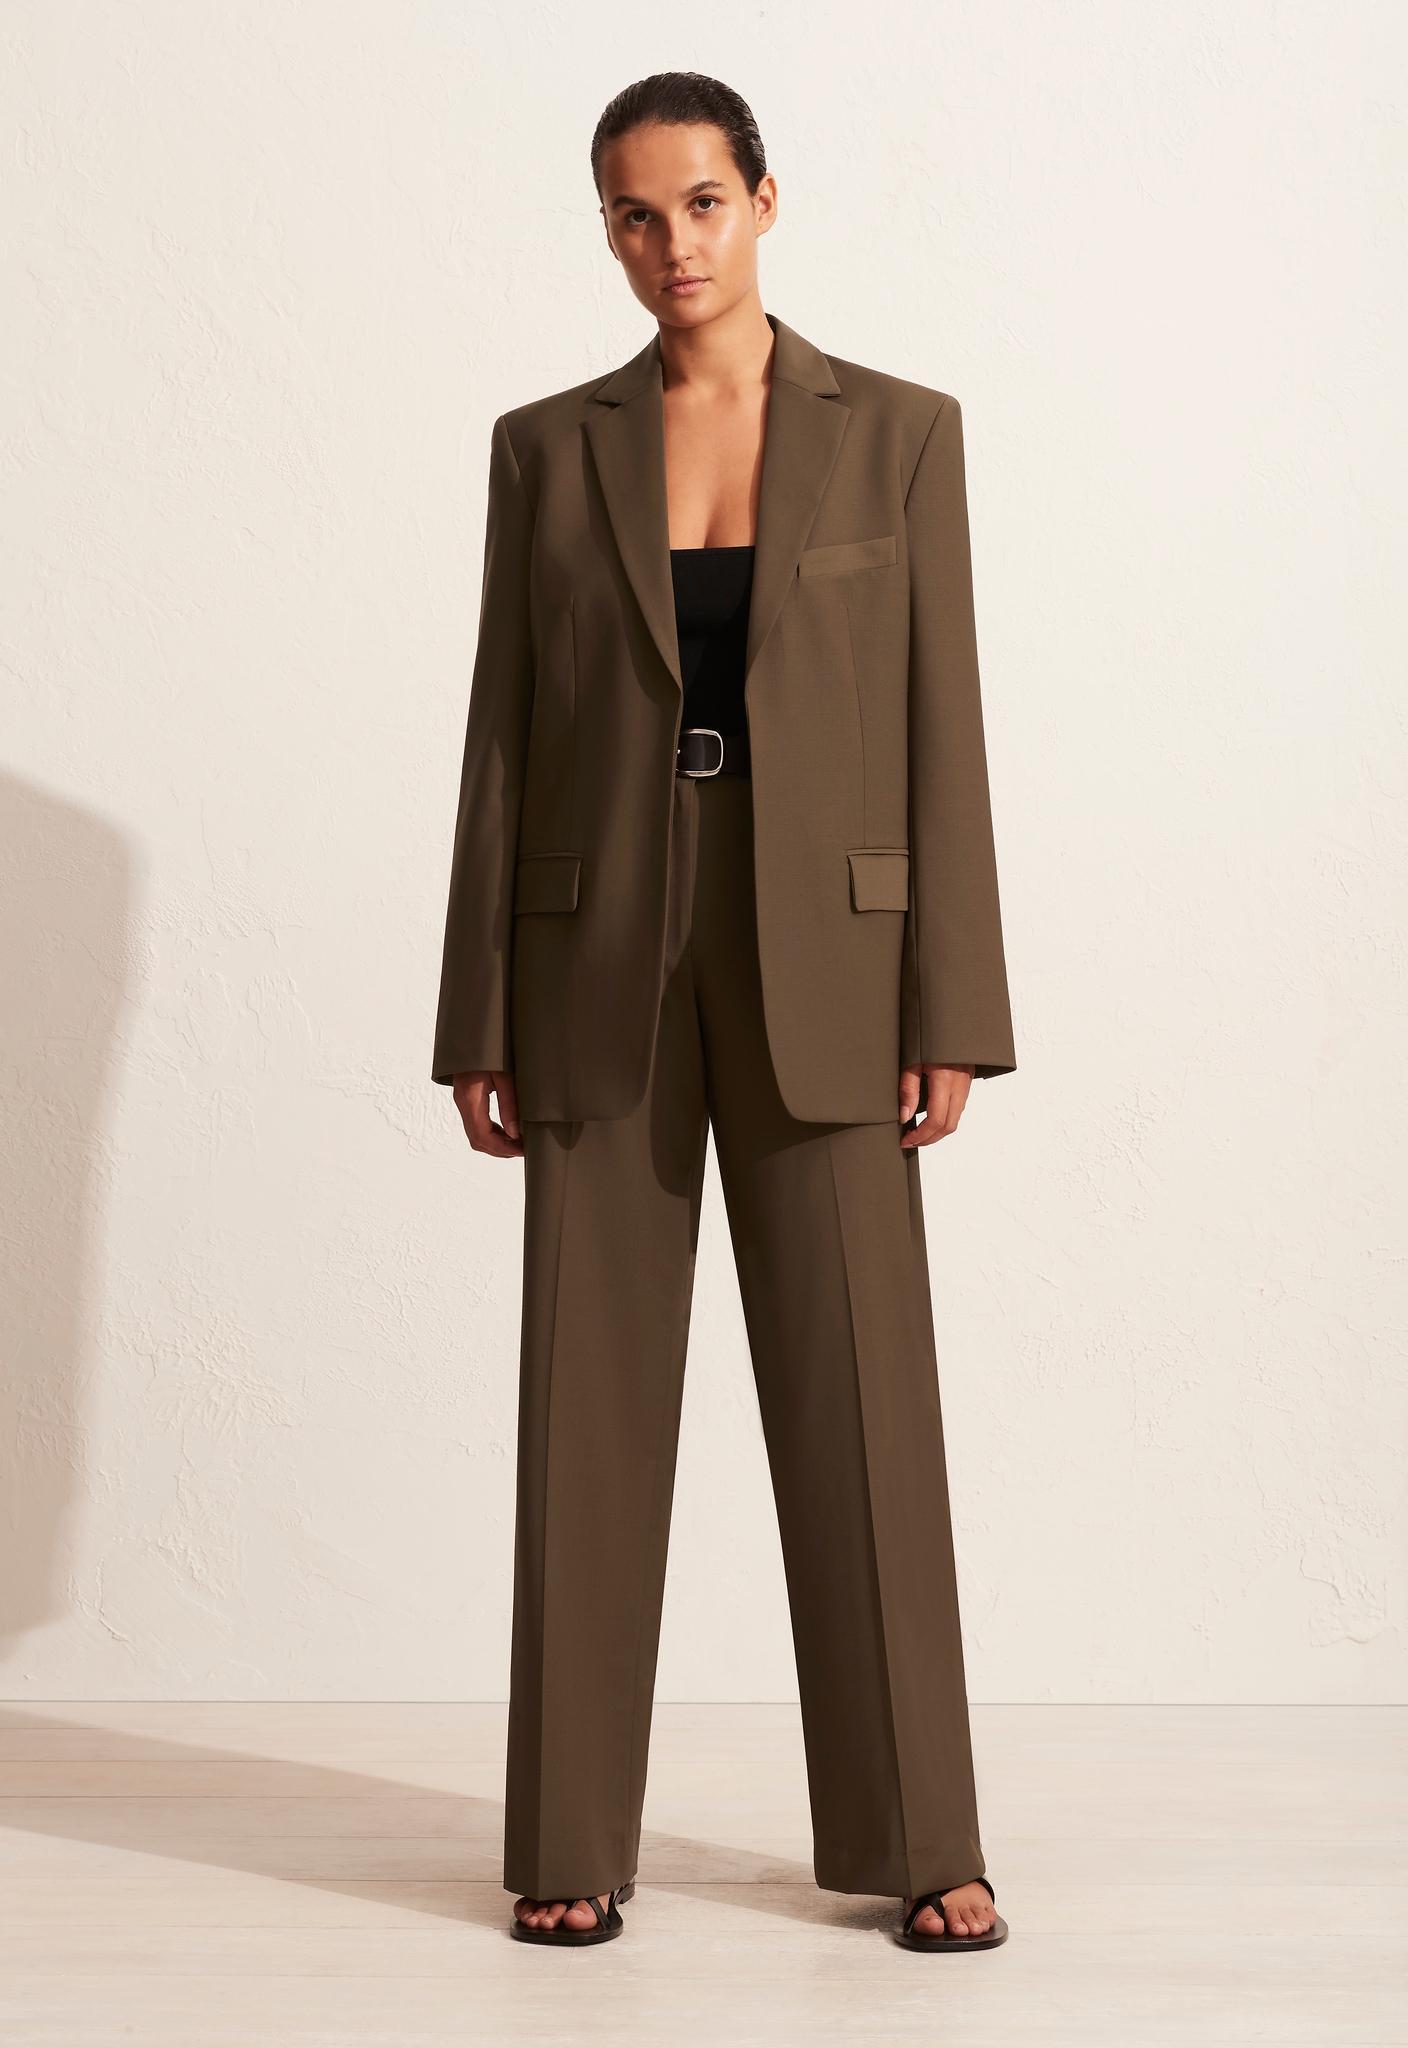 Relaxed Tailored Trouser Coffee - Matteau